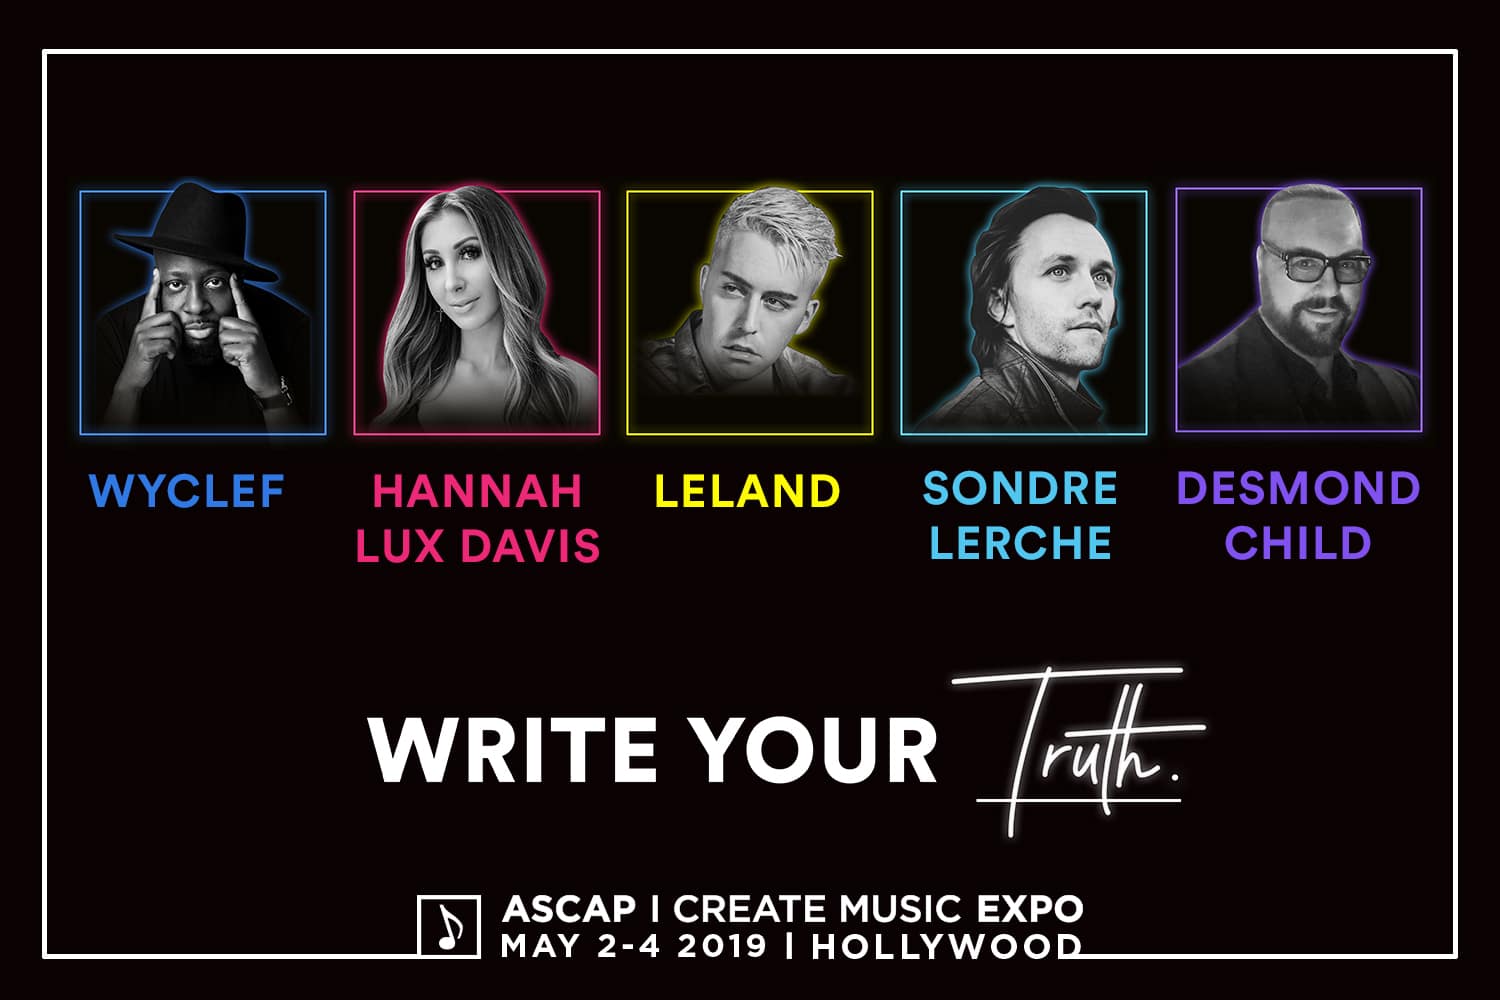 ASCAP Adds Hitmaking Music Creators Across Genres To 2019 “I Create Music” Expo Lineup